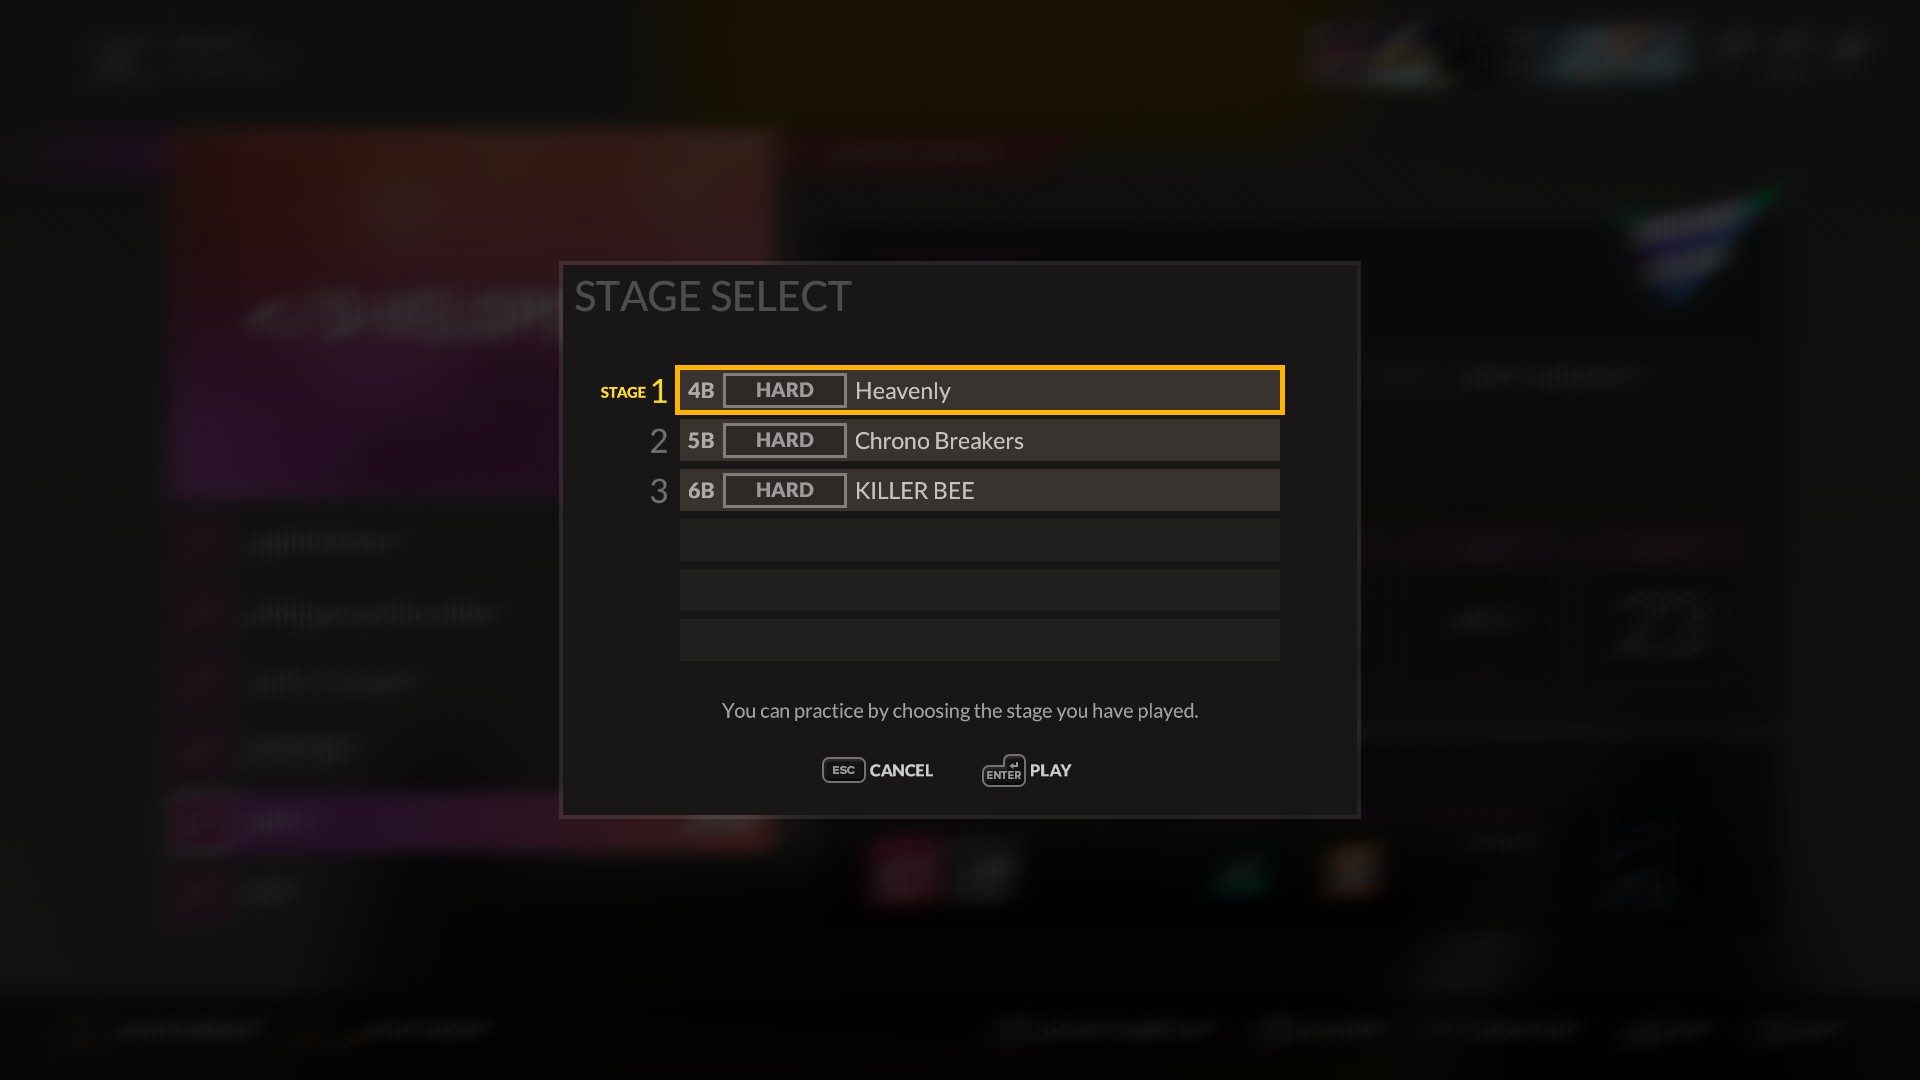 DJMAX RESPECT V - Full Walkthough + All Achievements Guide Complete - Mission Mode - 525686F